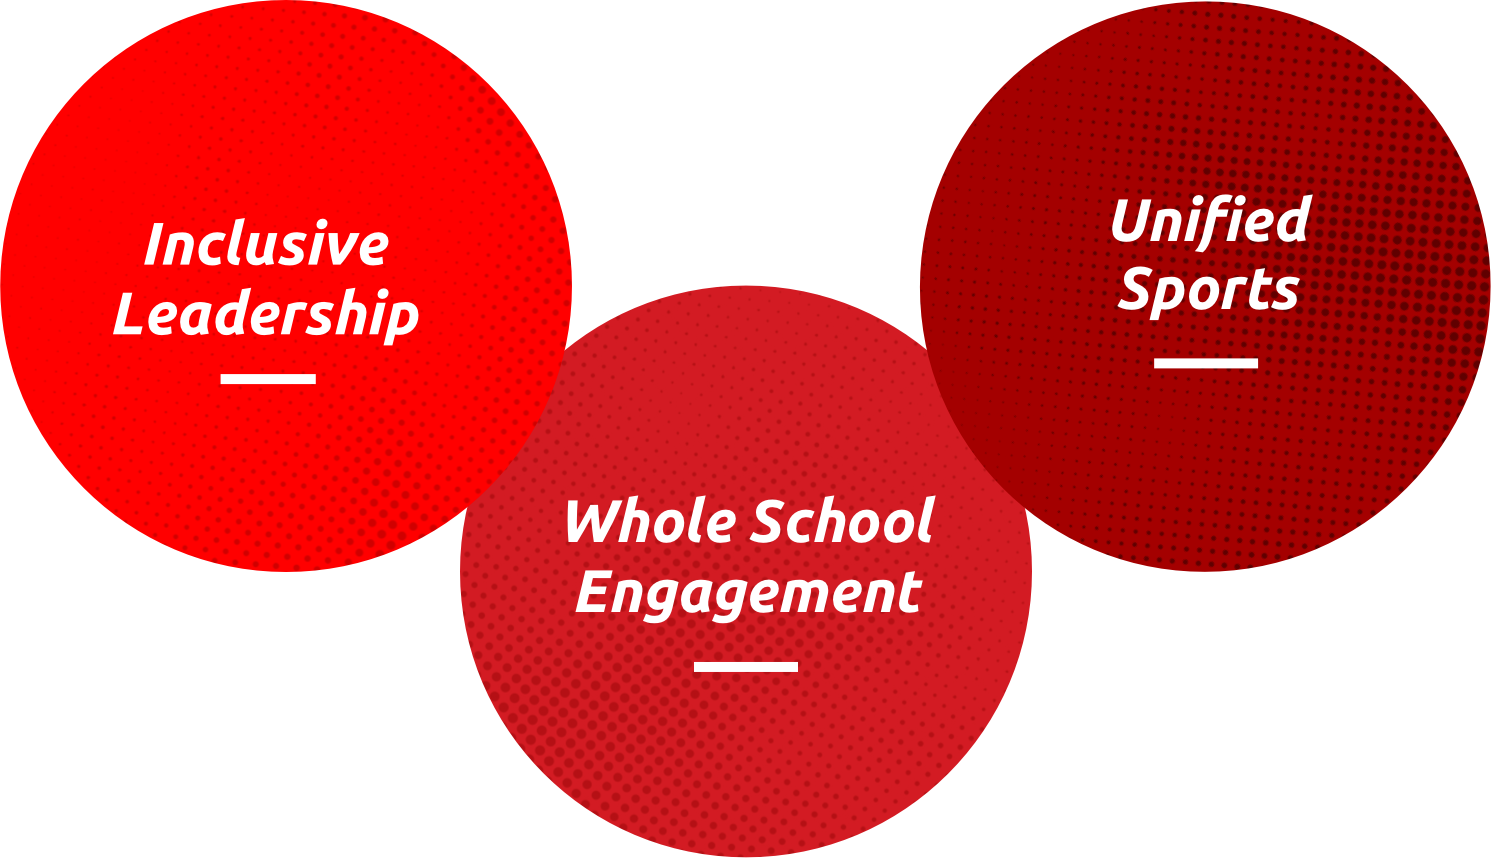 Unified Champion Schools 3 components: Inclusive Leadership, Whole School Engagement, Unified Sports